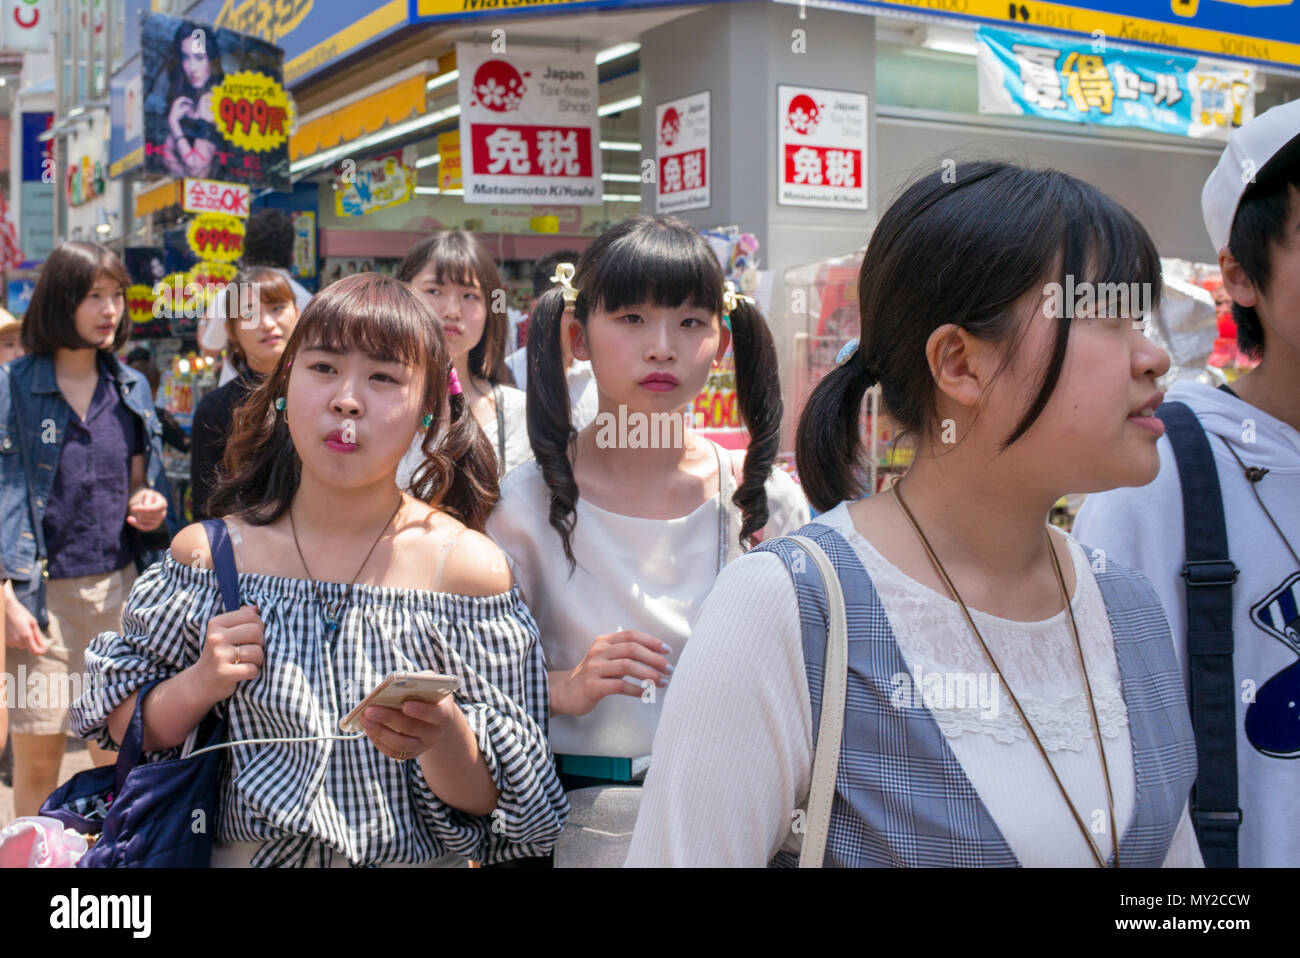 Crowds of people in Takeshita Street, a pedestrian shopping street lined with fashion boutiques, cafes and restaurants in Harajuku in Tokyo, Japan Stock Photo